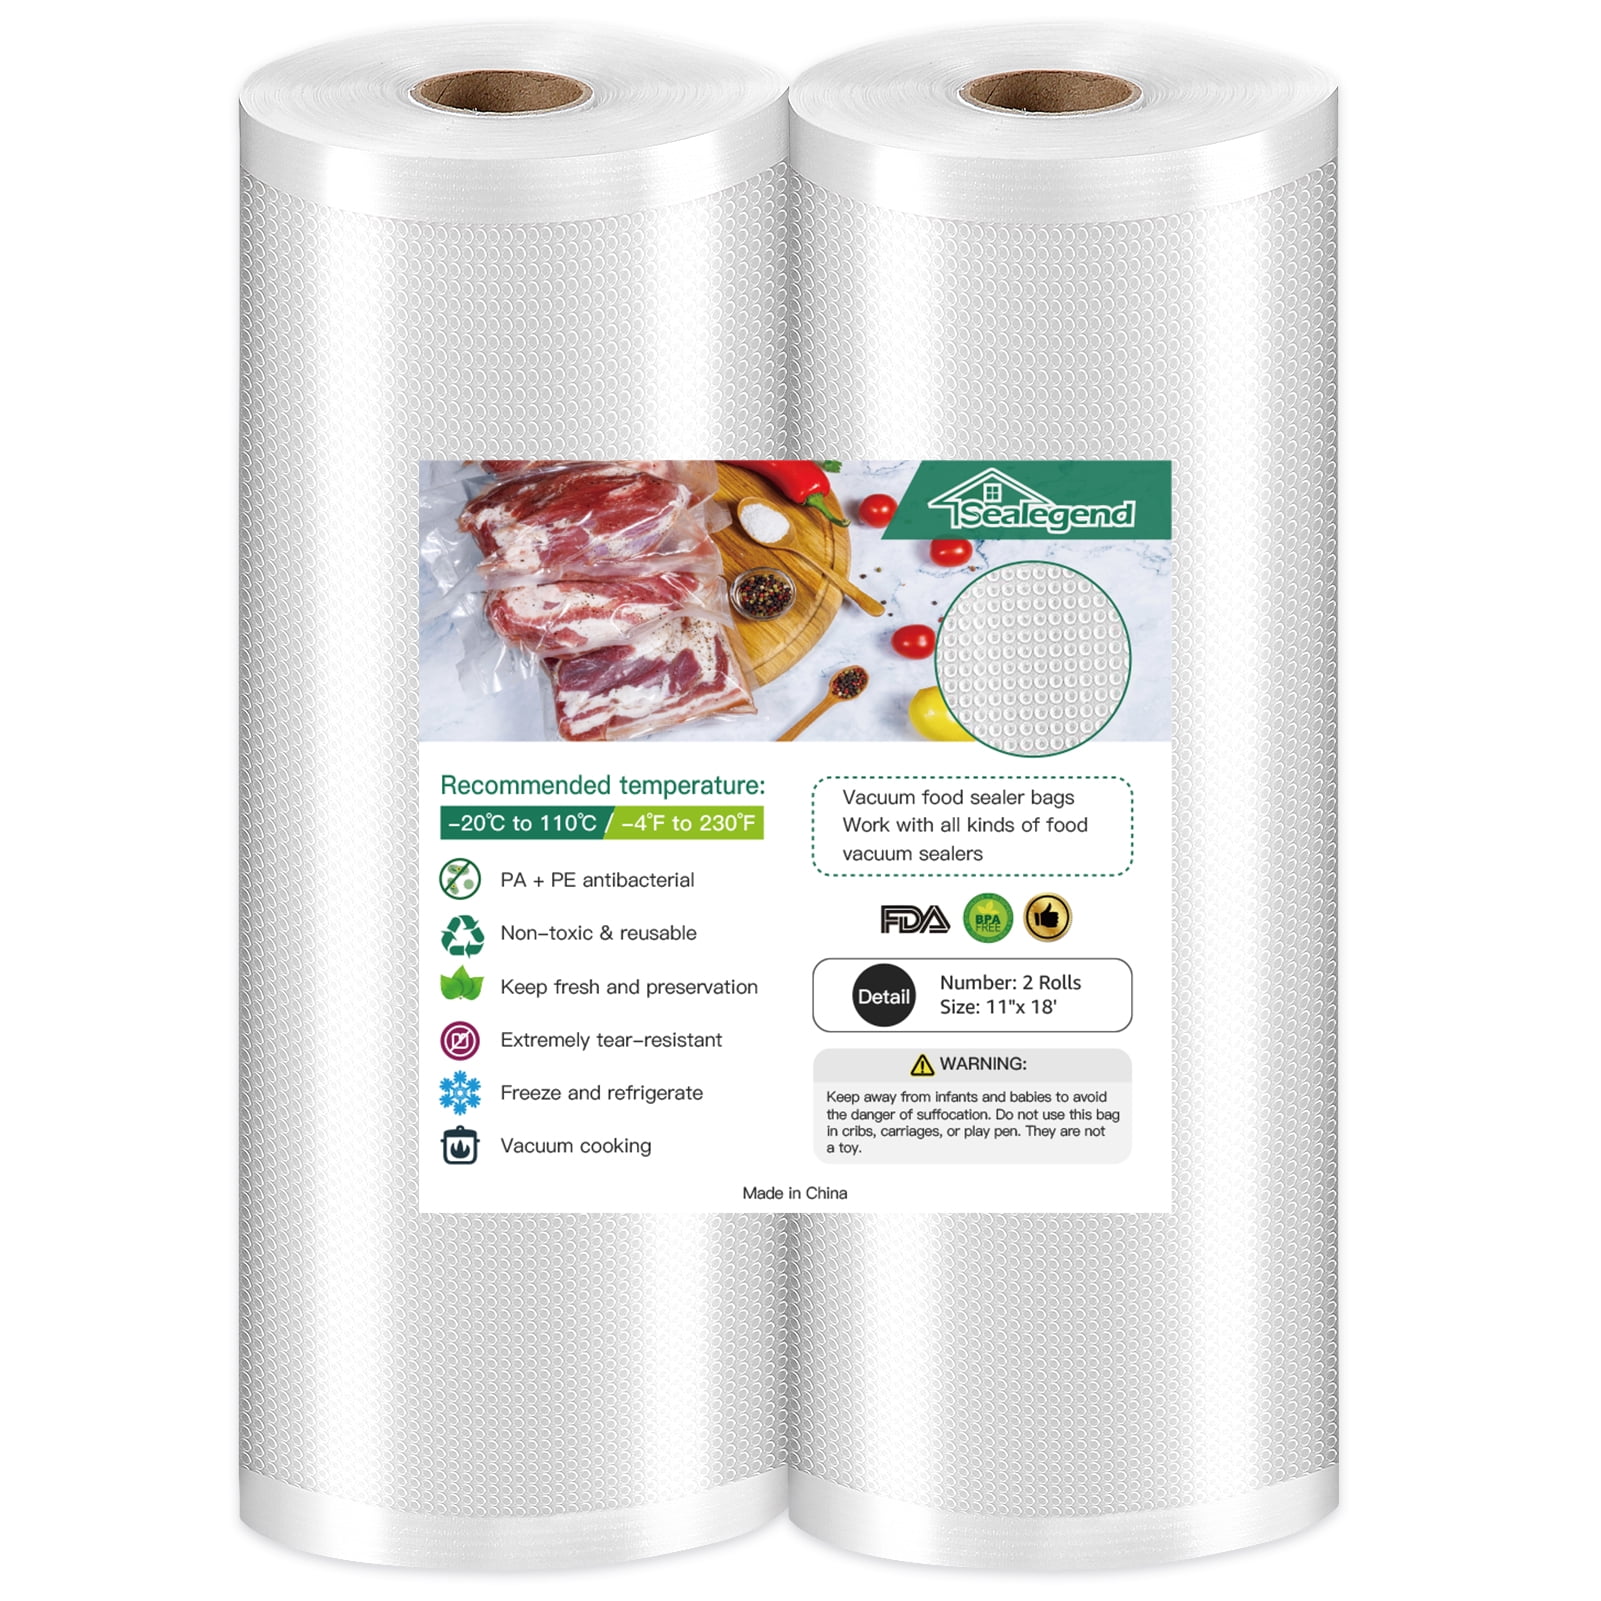  ILokey Vacuum Sealer Bags Rolls, 2 Rolls 8”x 16.5' and 2 Rolls  11”x 16.5', Sealer Bags for Food Storage, Commercial Grade Food Saver Bags,  Heavy Duty Embossed and Custom-Sized Design, BPA-Free